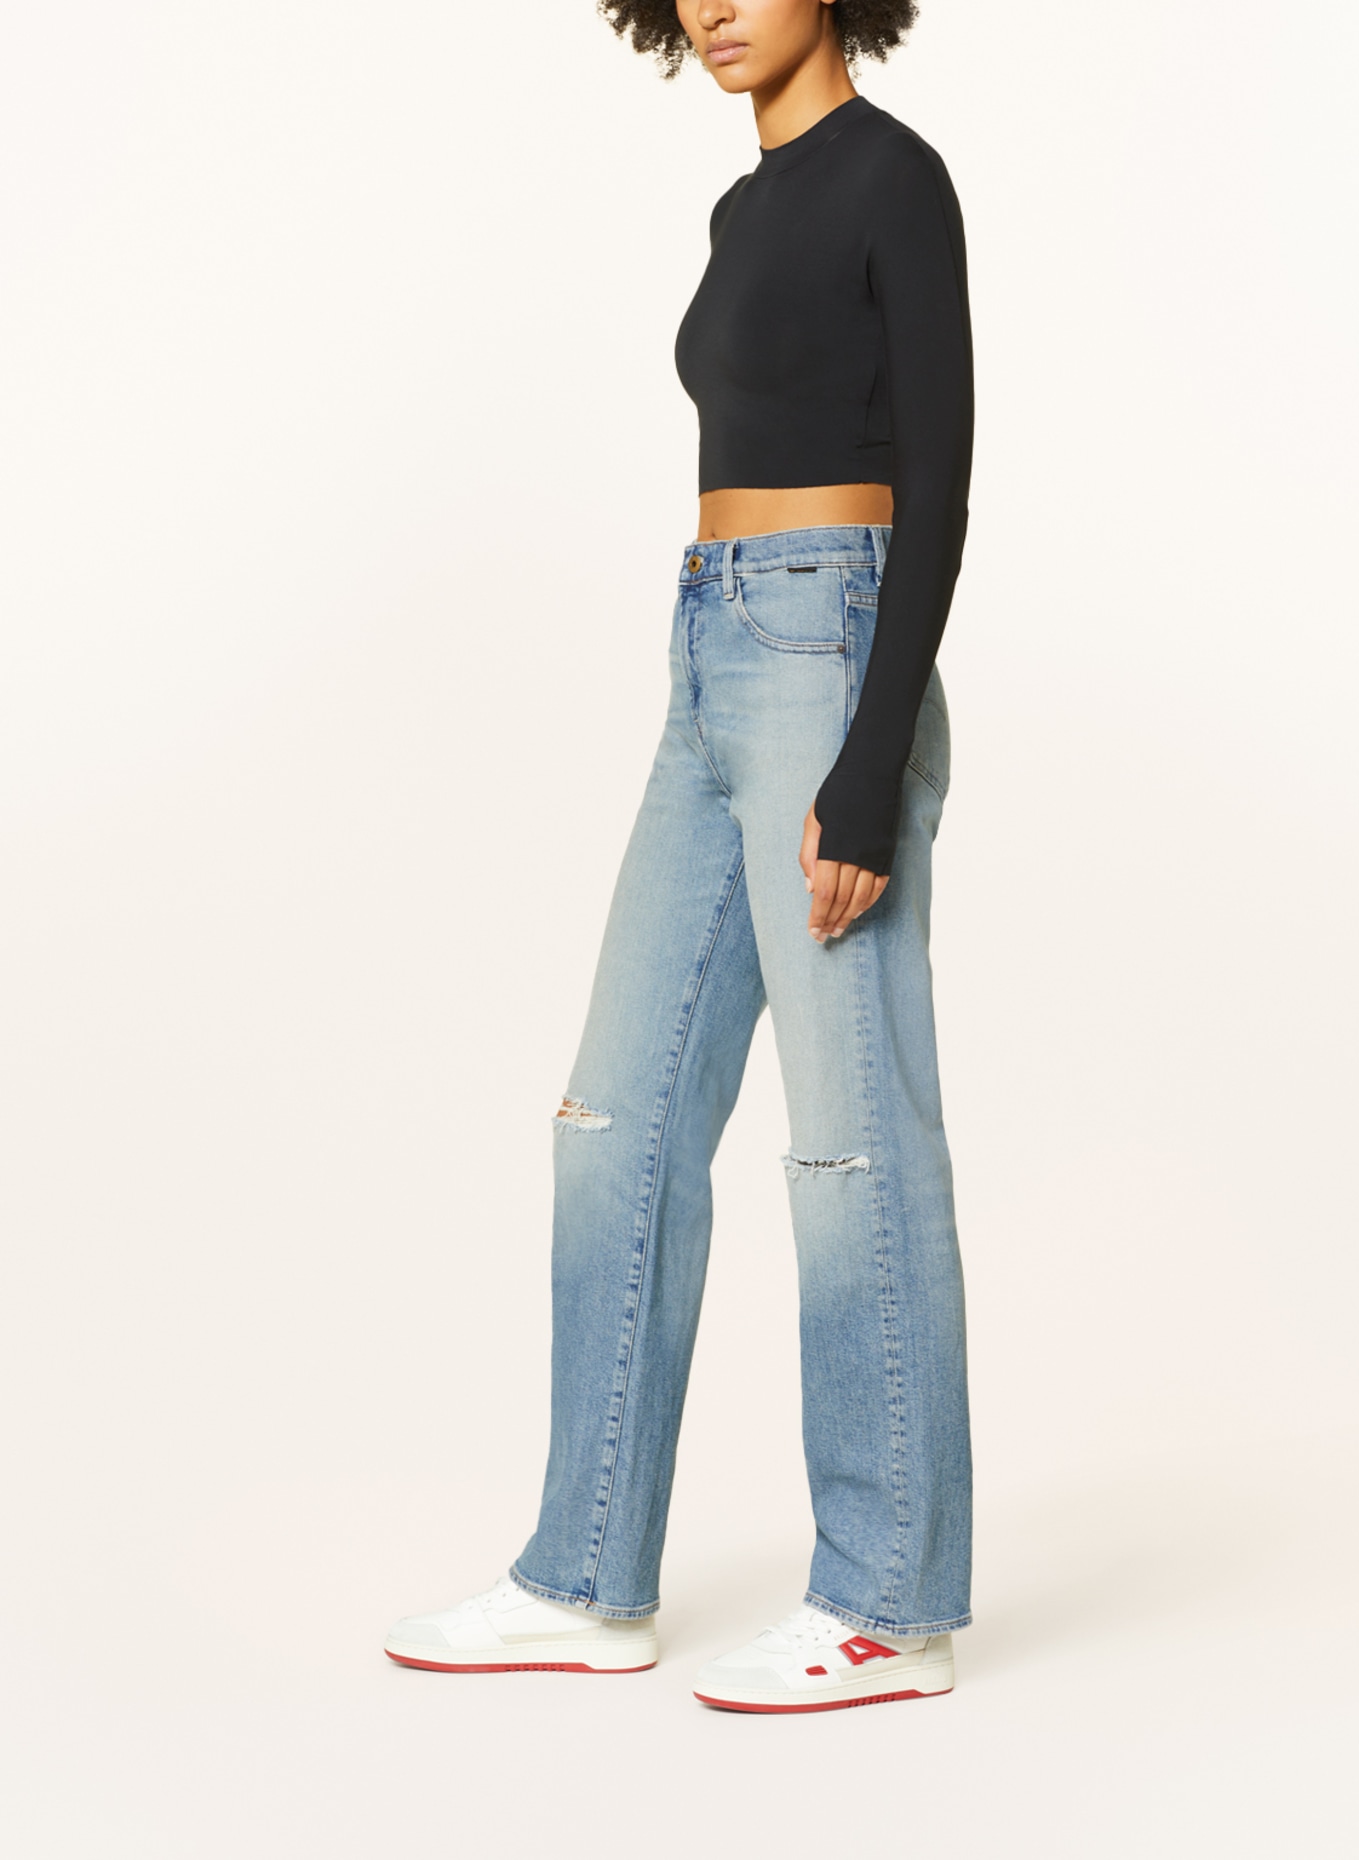 G-Star RAW Straight Jeans VIKTORIA, Farbe: G130 antique faded blue agave ripped (Bild 4)